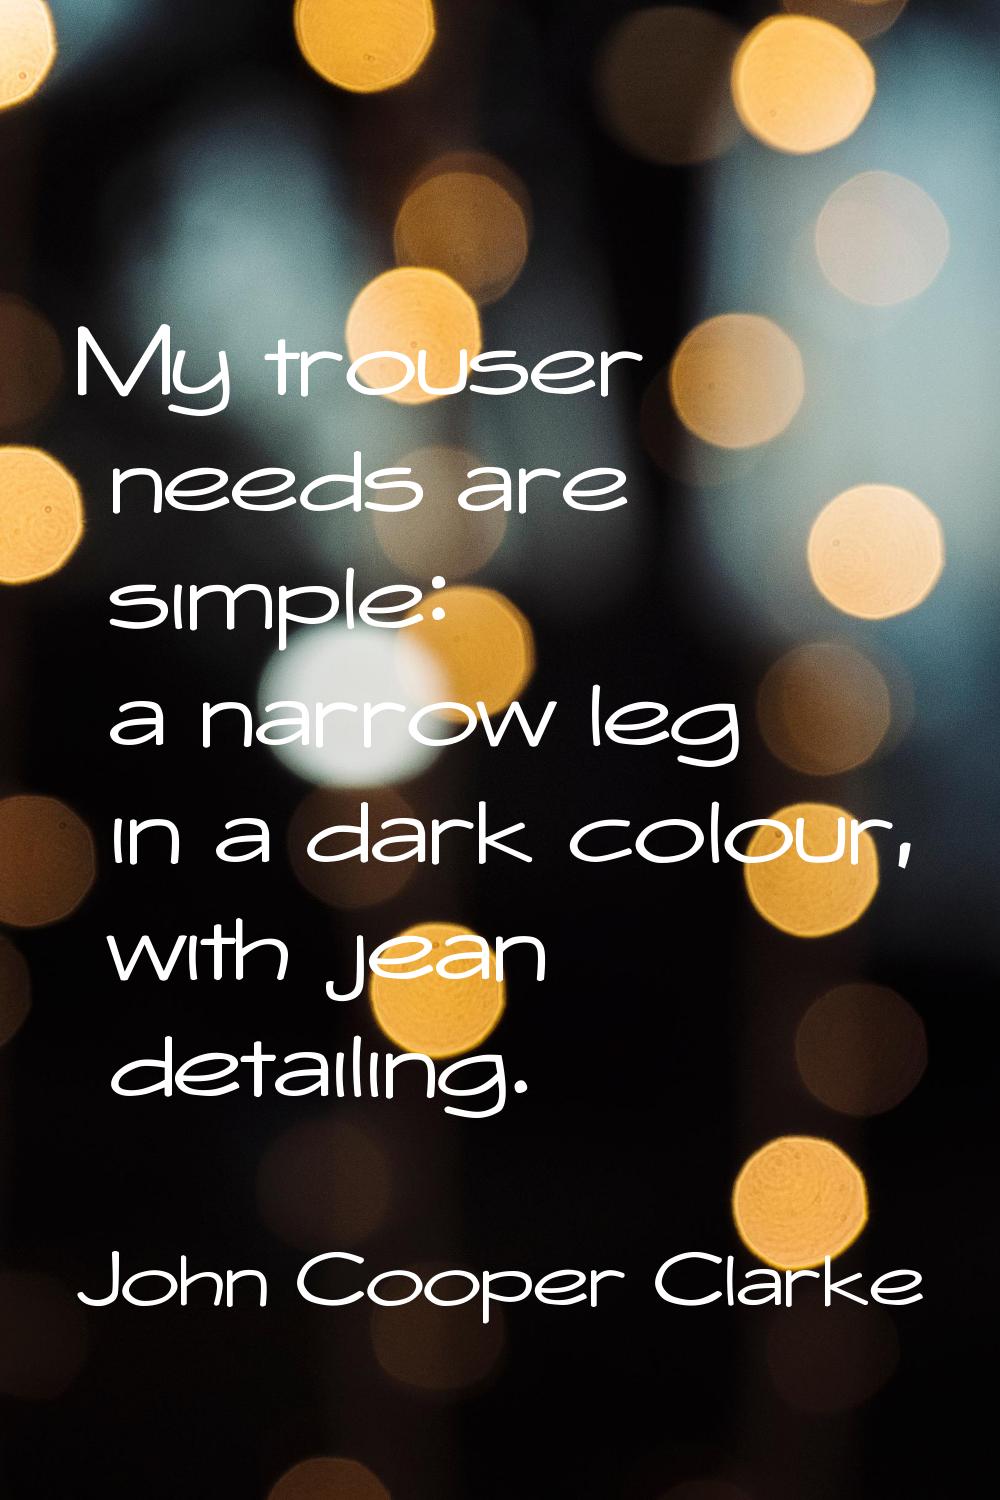 My trouser needs are simple: a narrow leg in a dark colour, with jean detailing.